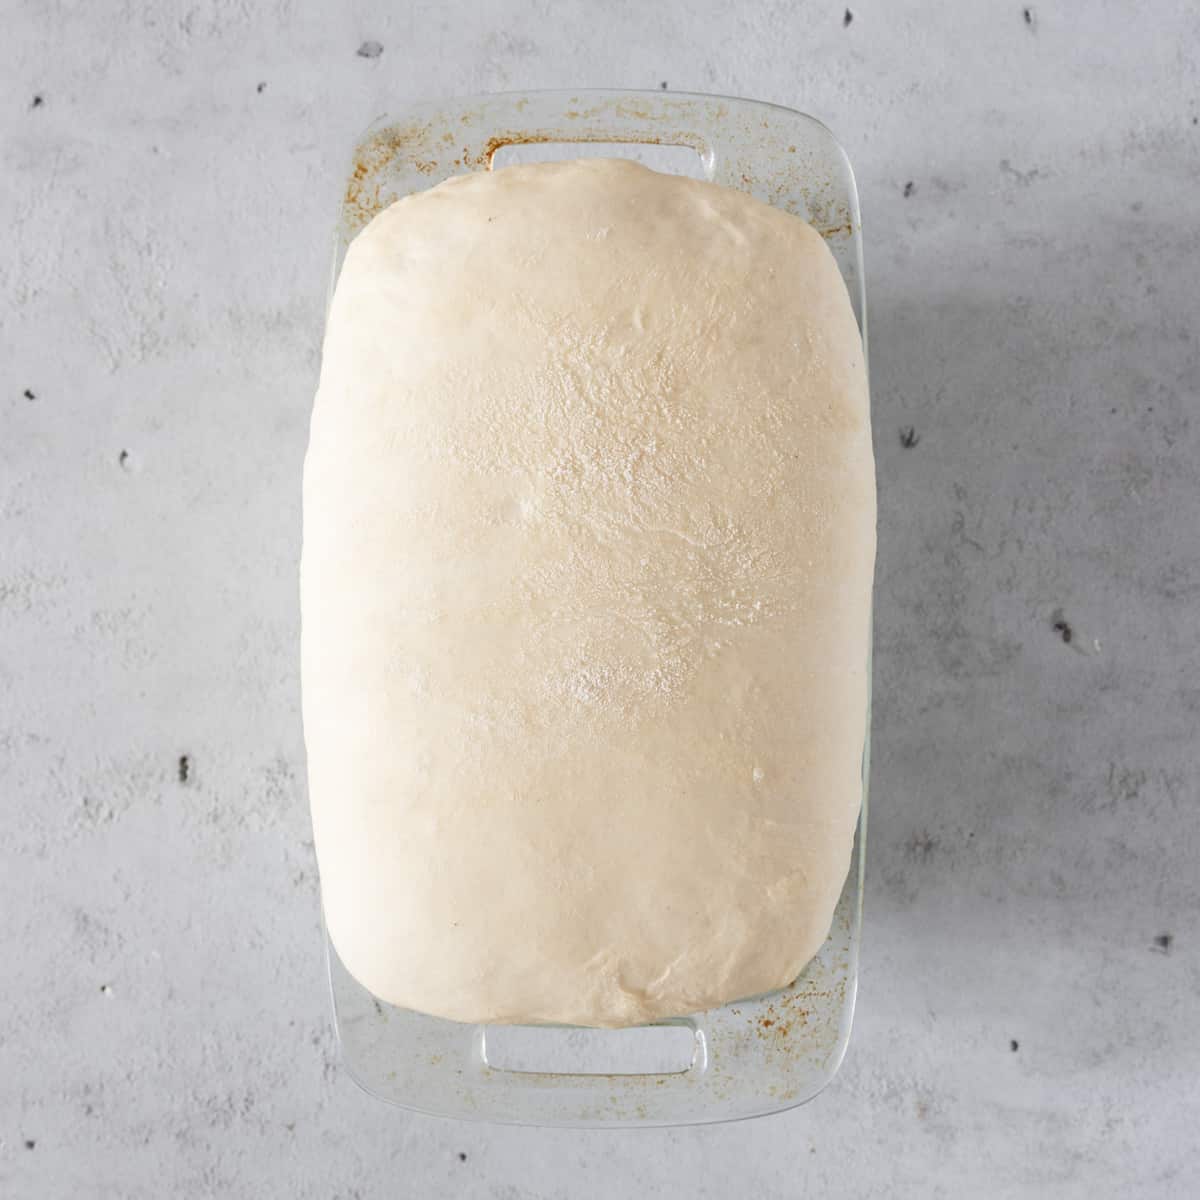 the bread dough in a glass bread pan after rising on a grey background.